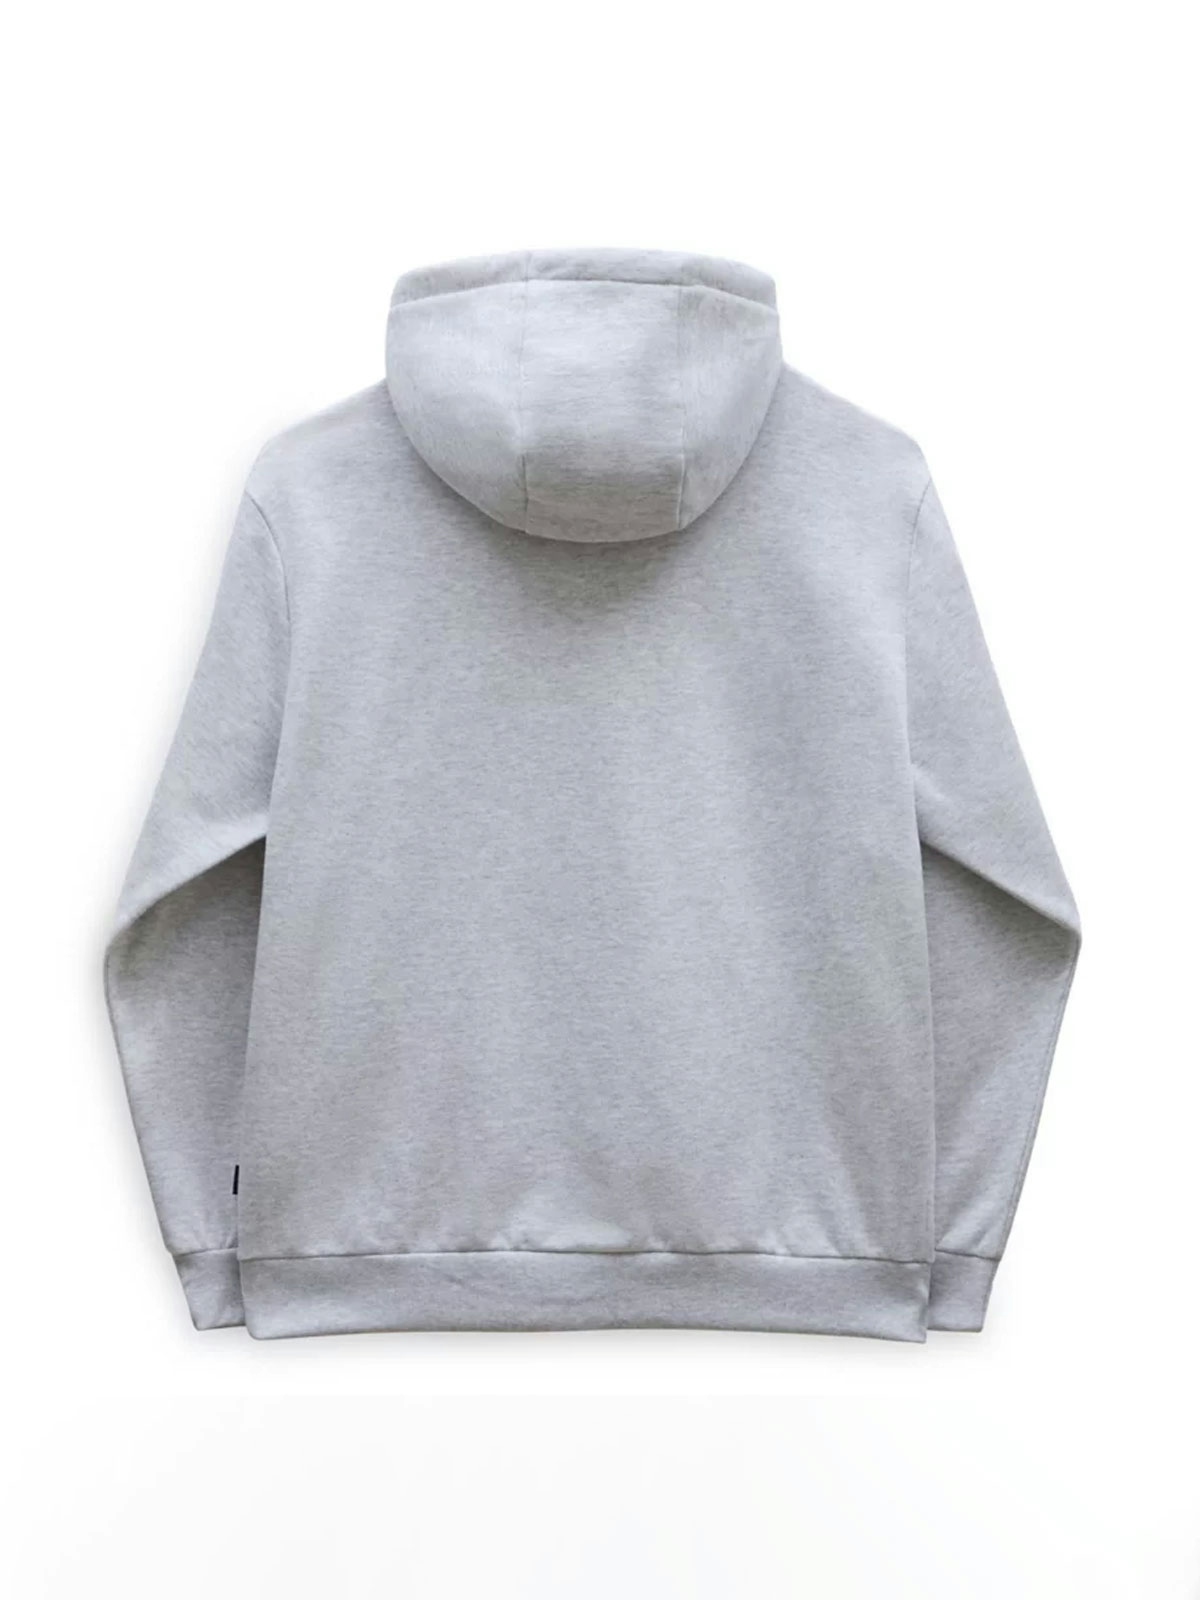 Vans Relaxed Fit Hoodie Light Grey Heather 2